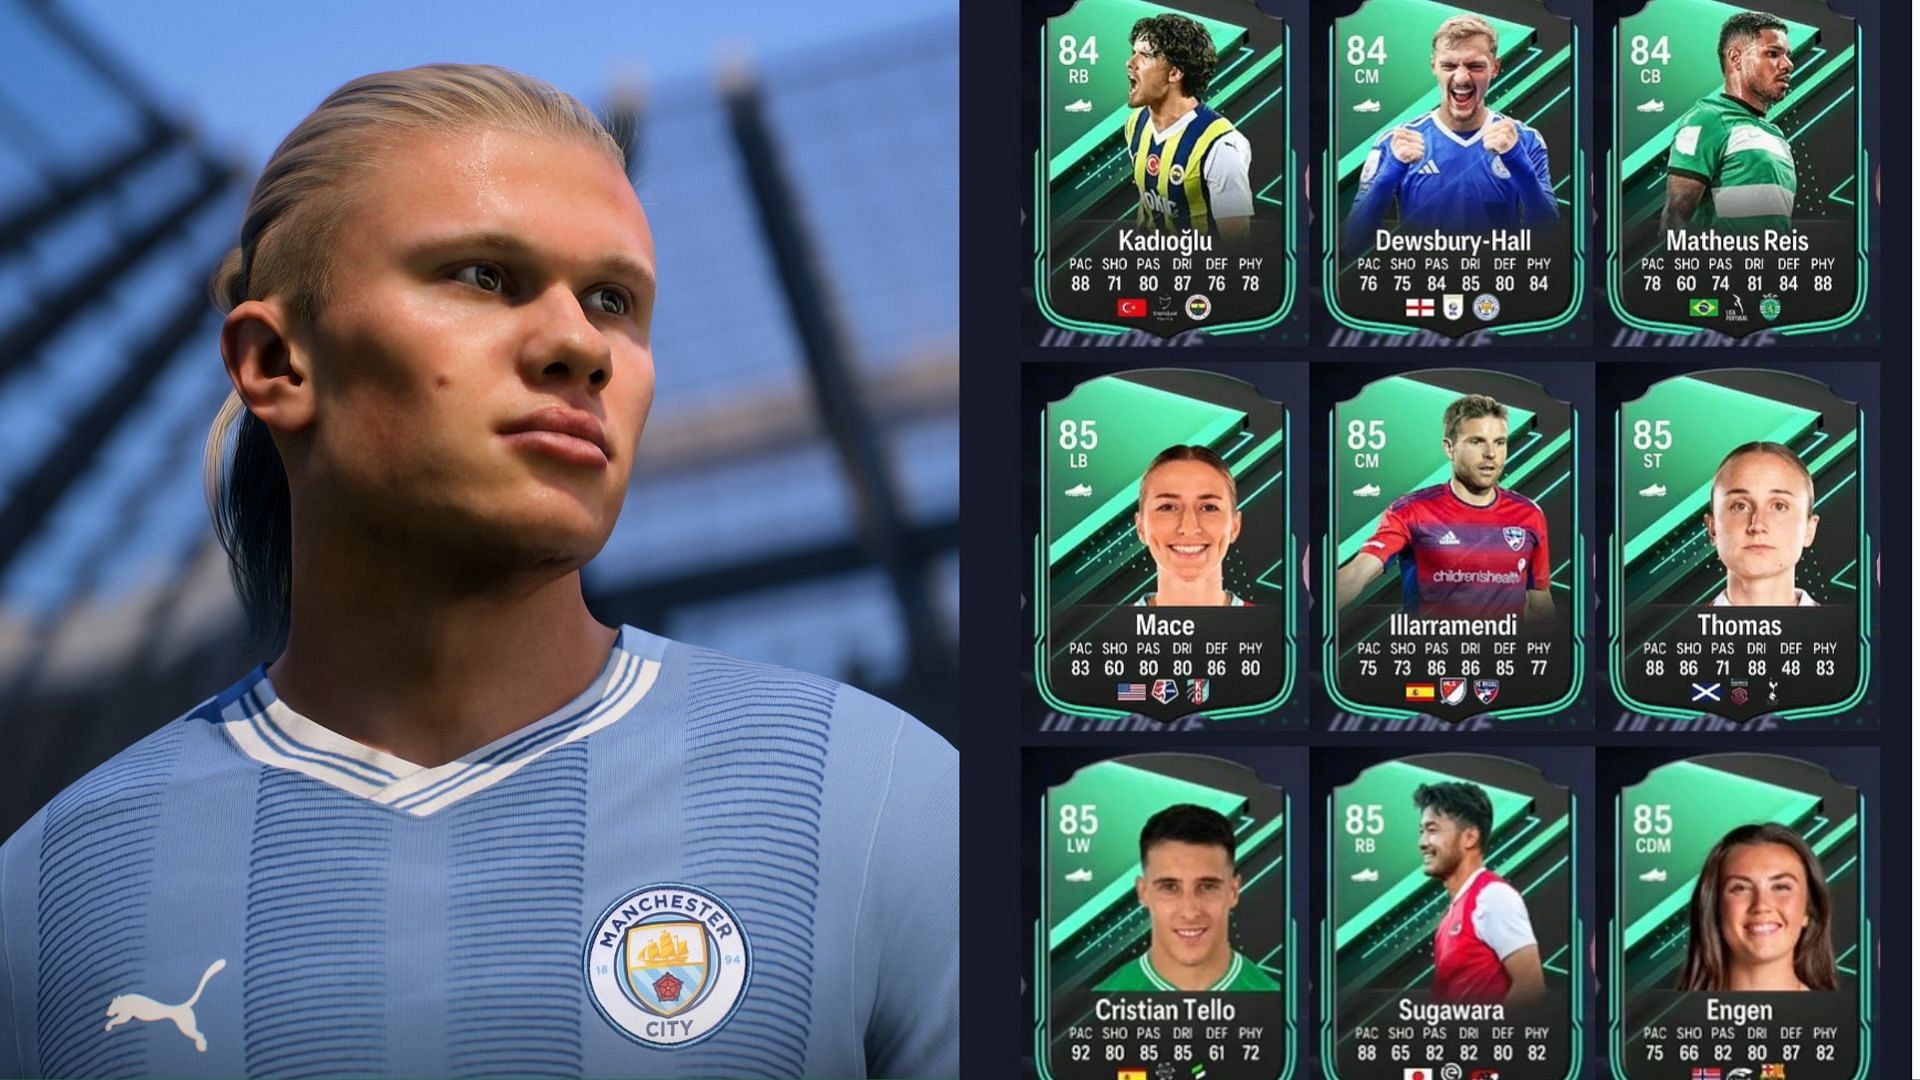 FIFA 22 Prime Gaming Pack 11 gives you a 83+ rated player pick